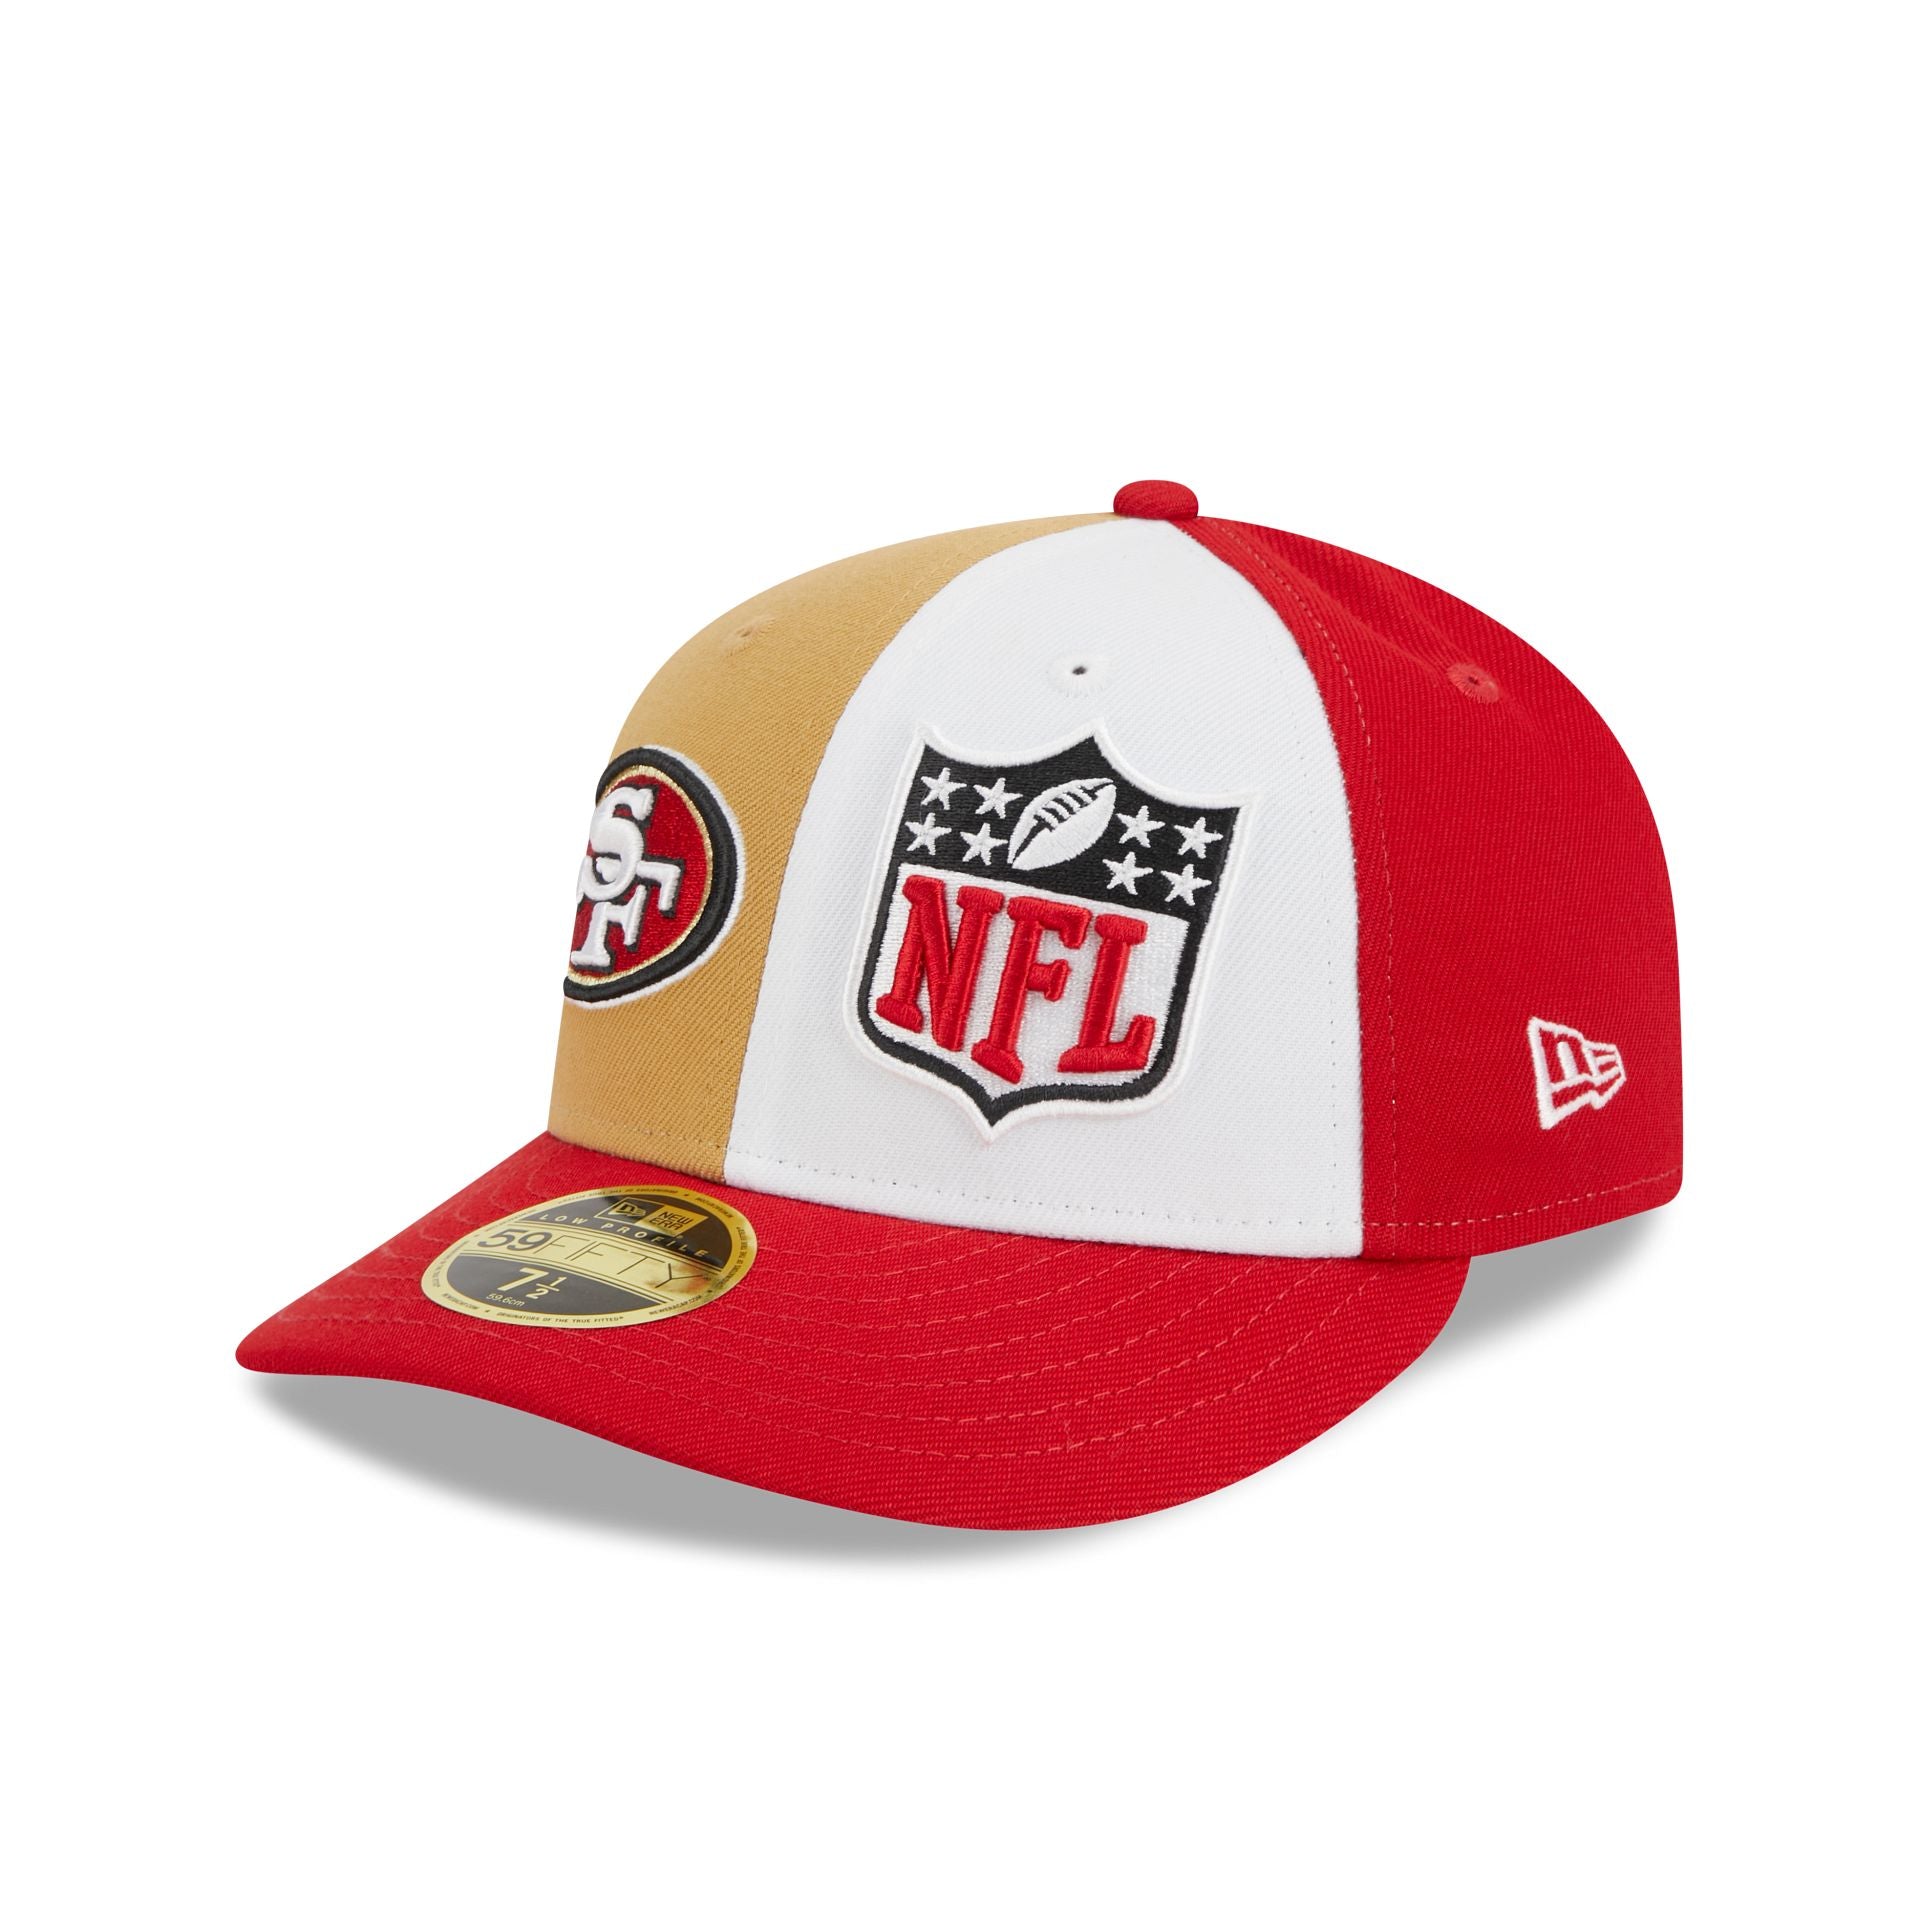 San Francisco 49ers Custom New Era 59FIFTY Cap Scarlet Patch – JustFitteds